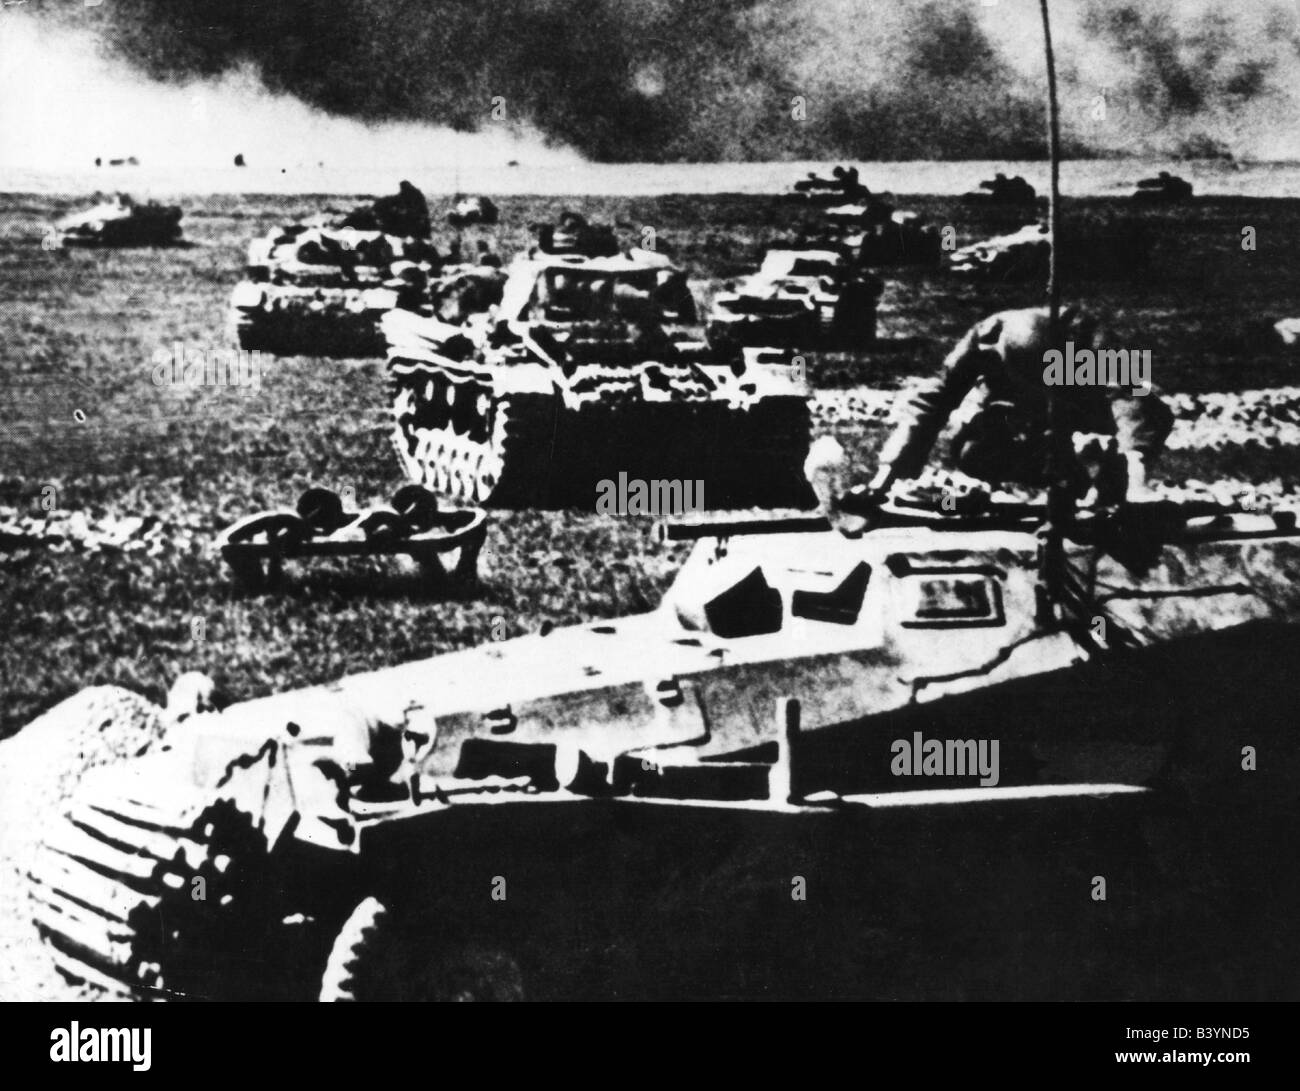 events, Second World War / WWII, Russia 1941, German advance, Wehrmacht tank unit, Panzer III and armoured half-track vehicle SdKfz 250, June 1941, Stock Photo